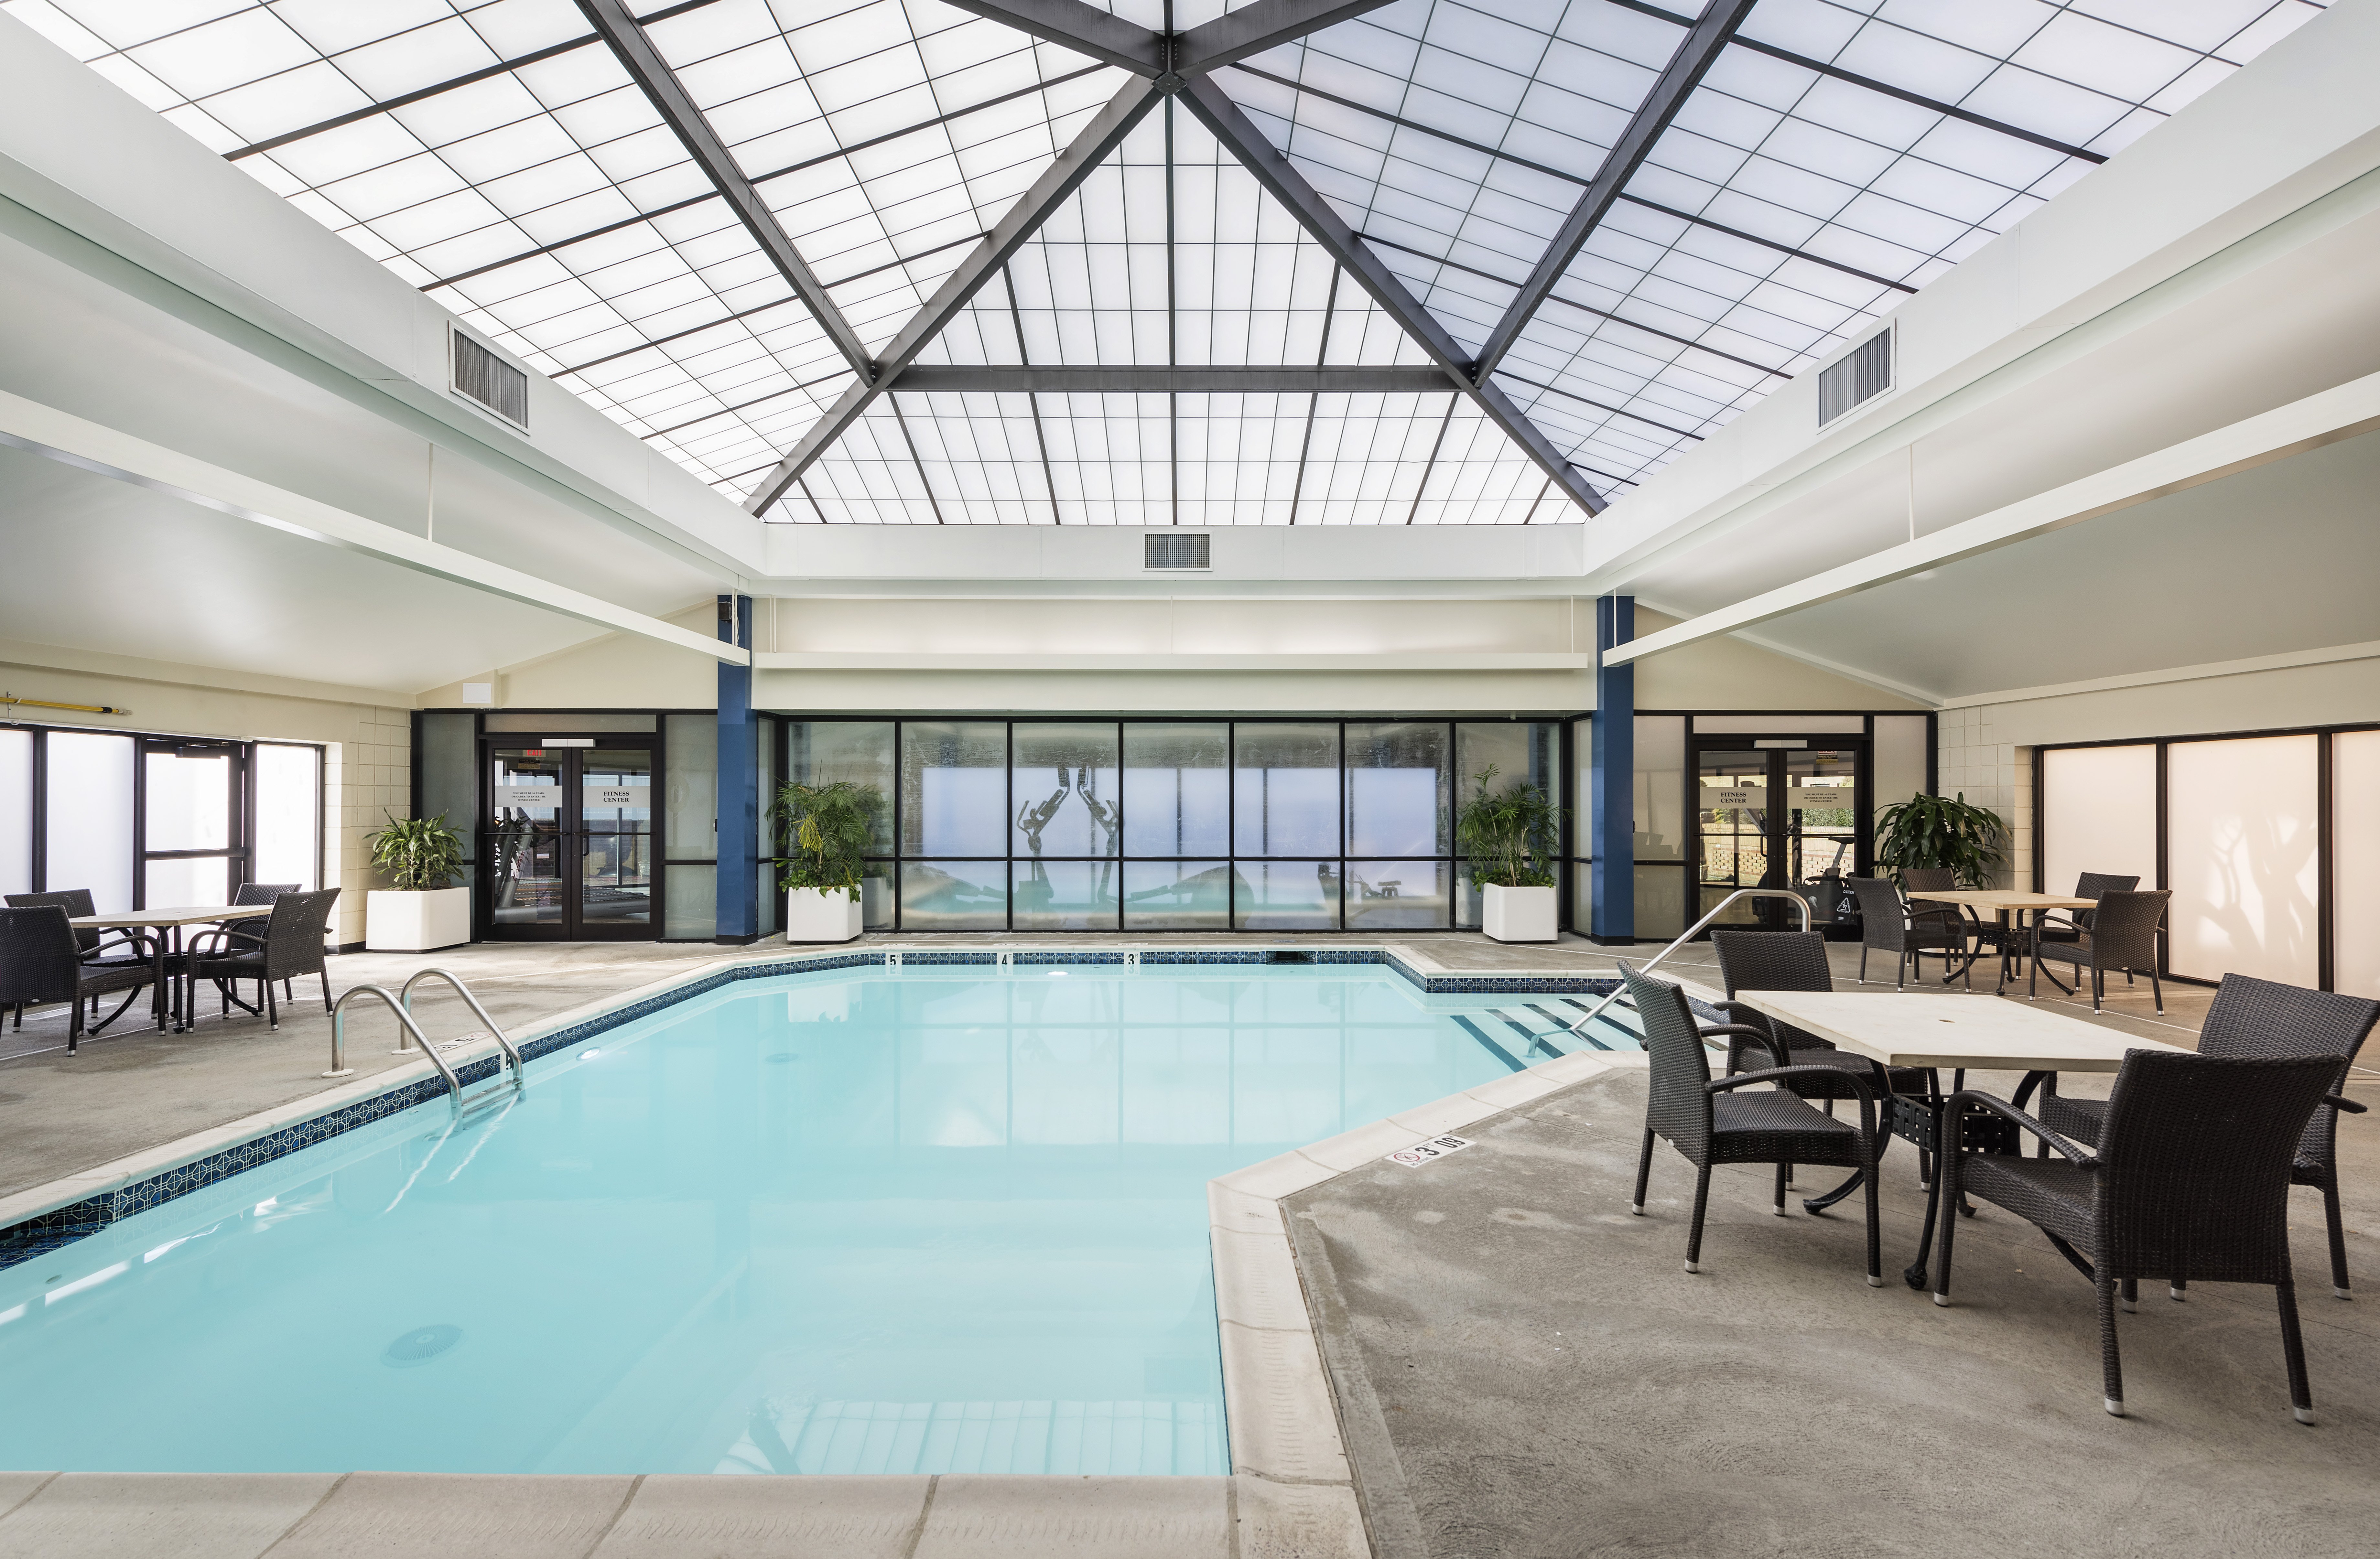 Our indoor swimming pool gets you cozy and relaxed.